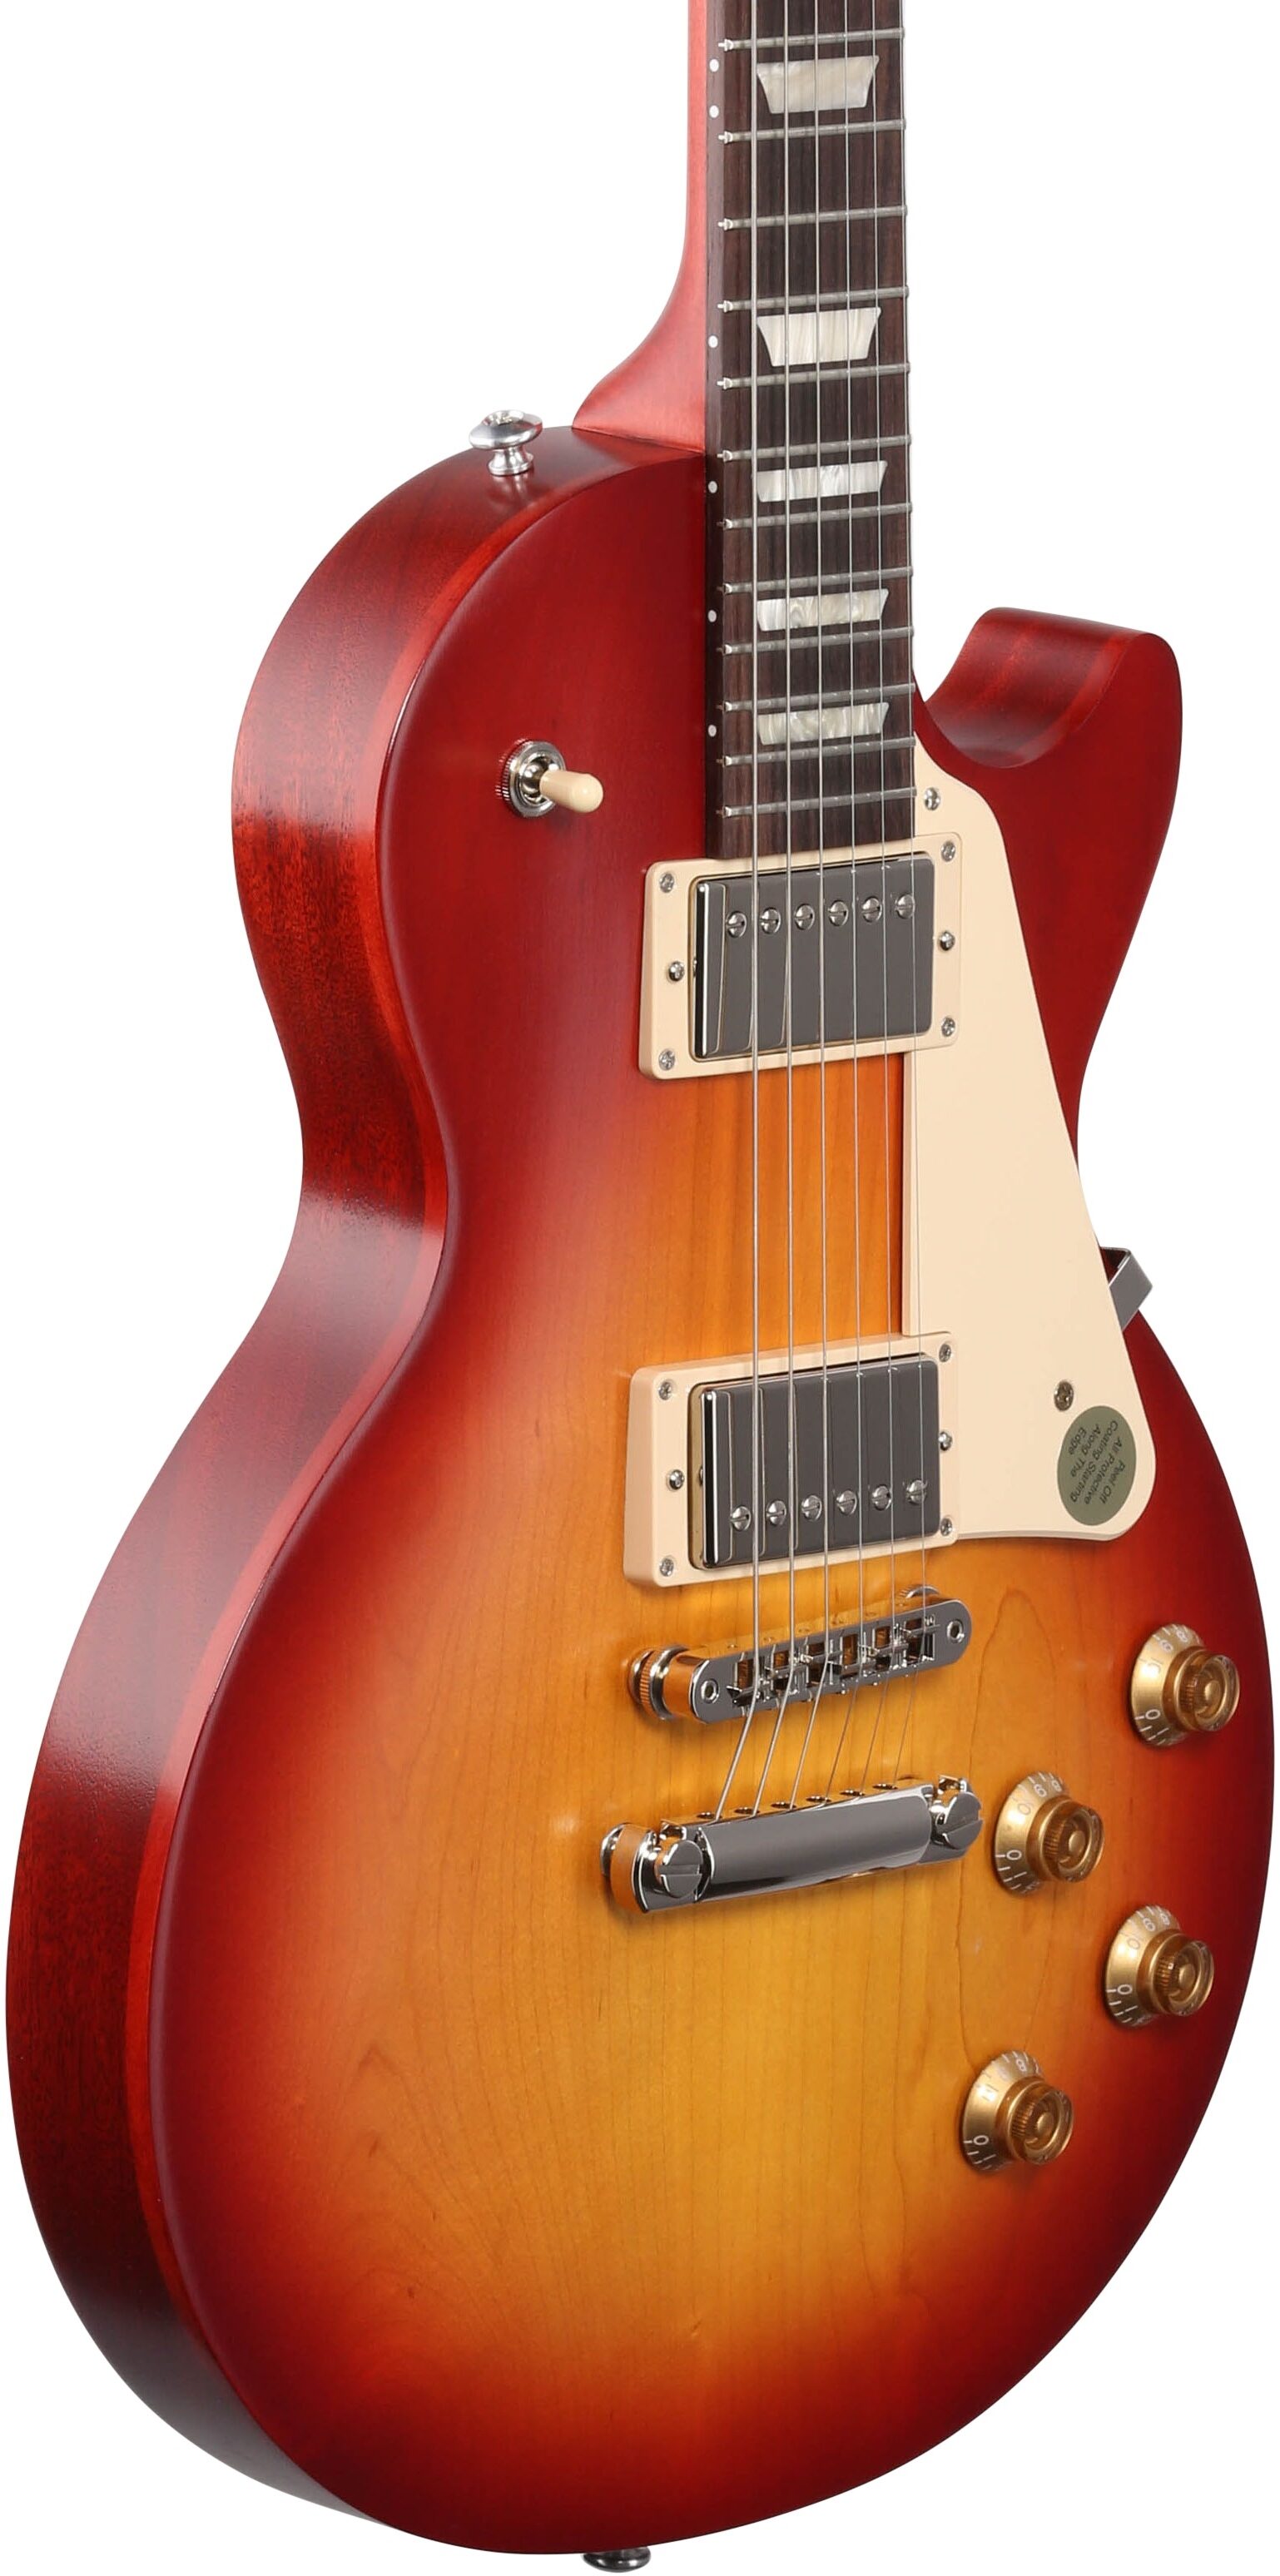 Gibson Les Paul Tribute Electric Guitar zZounds